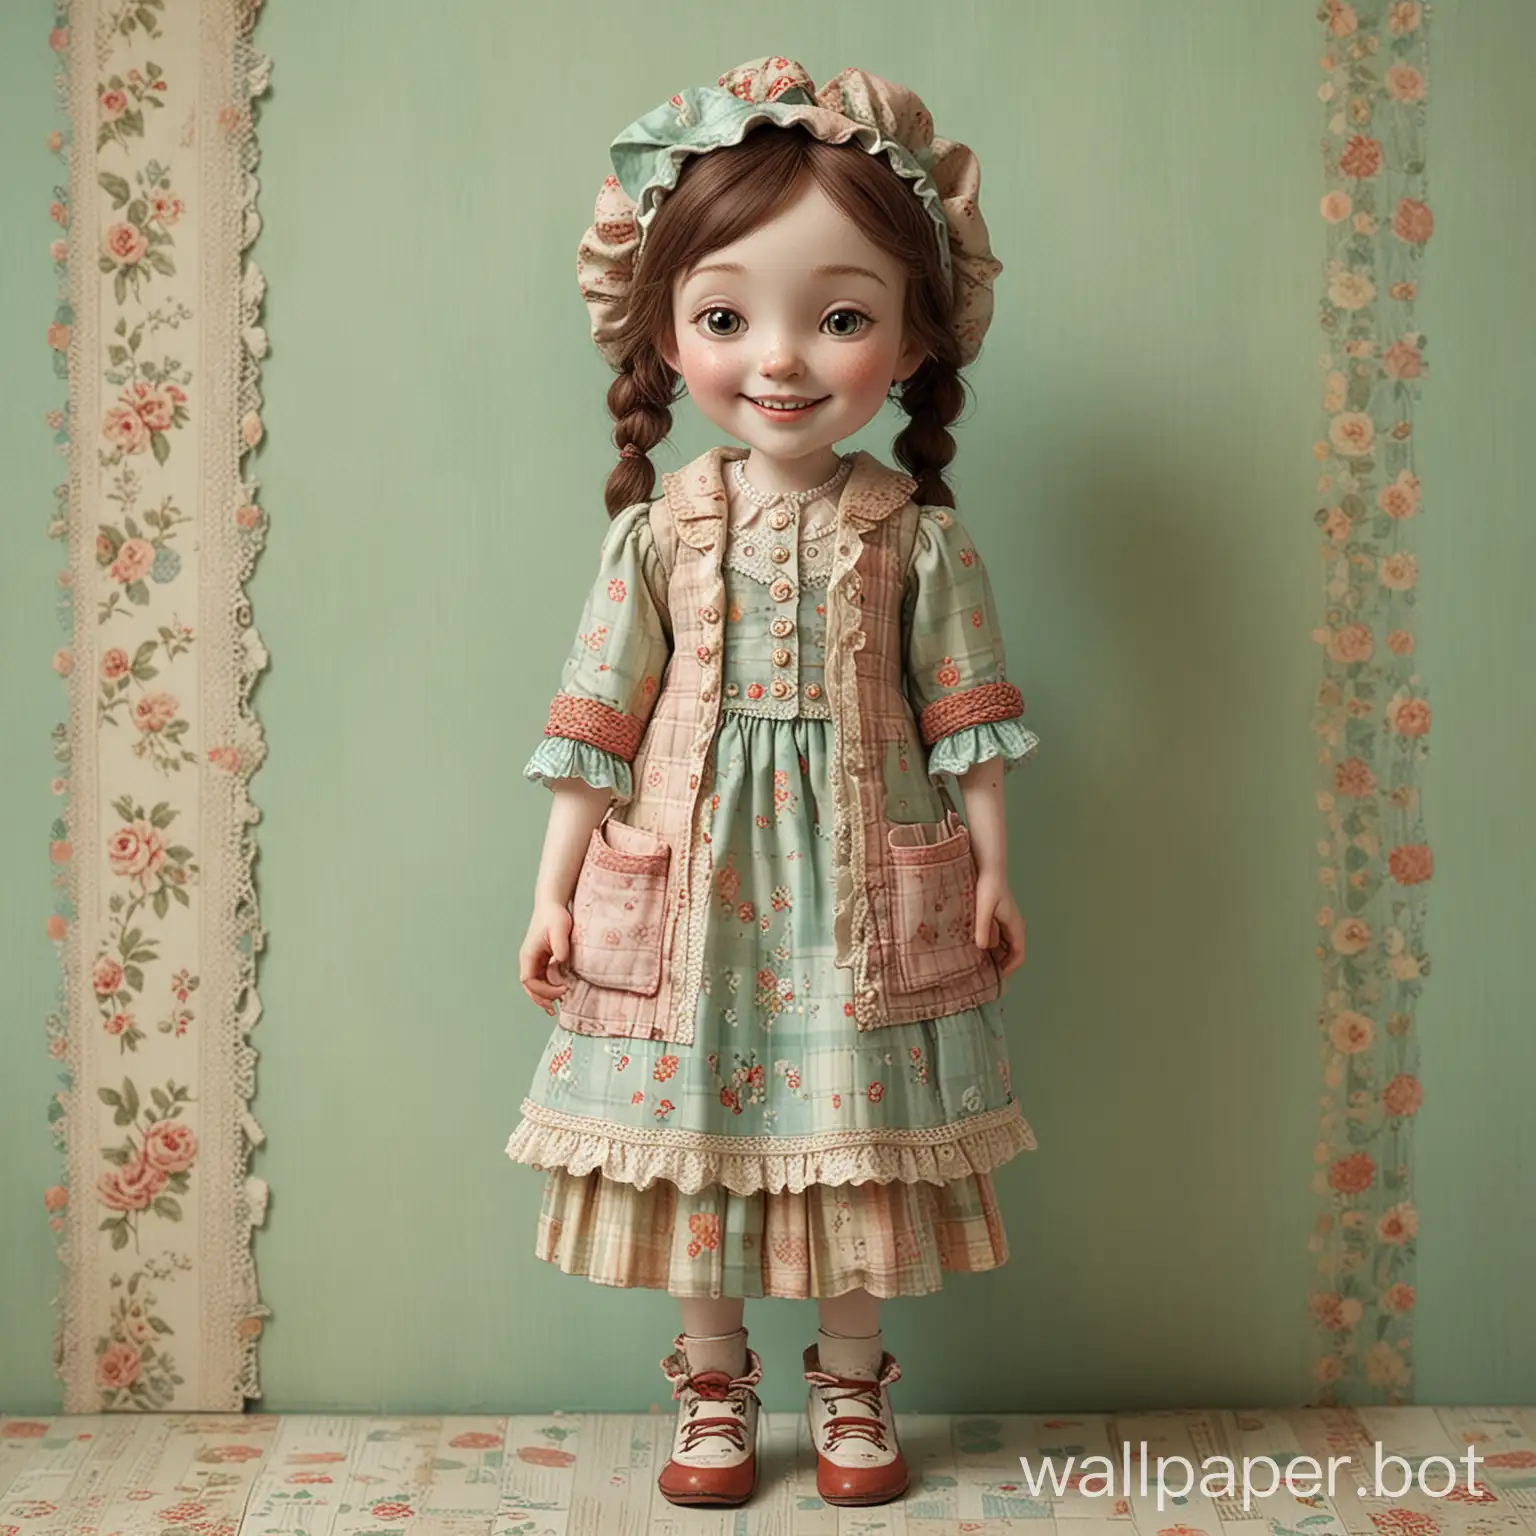 charming little lady in full-length patchwork clothes. dynamic, smiling, with freckles. Cozy, soft tones on a mint light distressed background, art by Suzanne Woolcott, Mark Ryden. 3D, porcelain, gloss